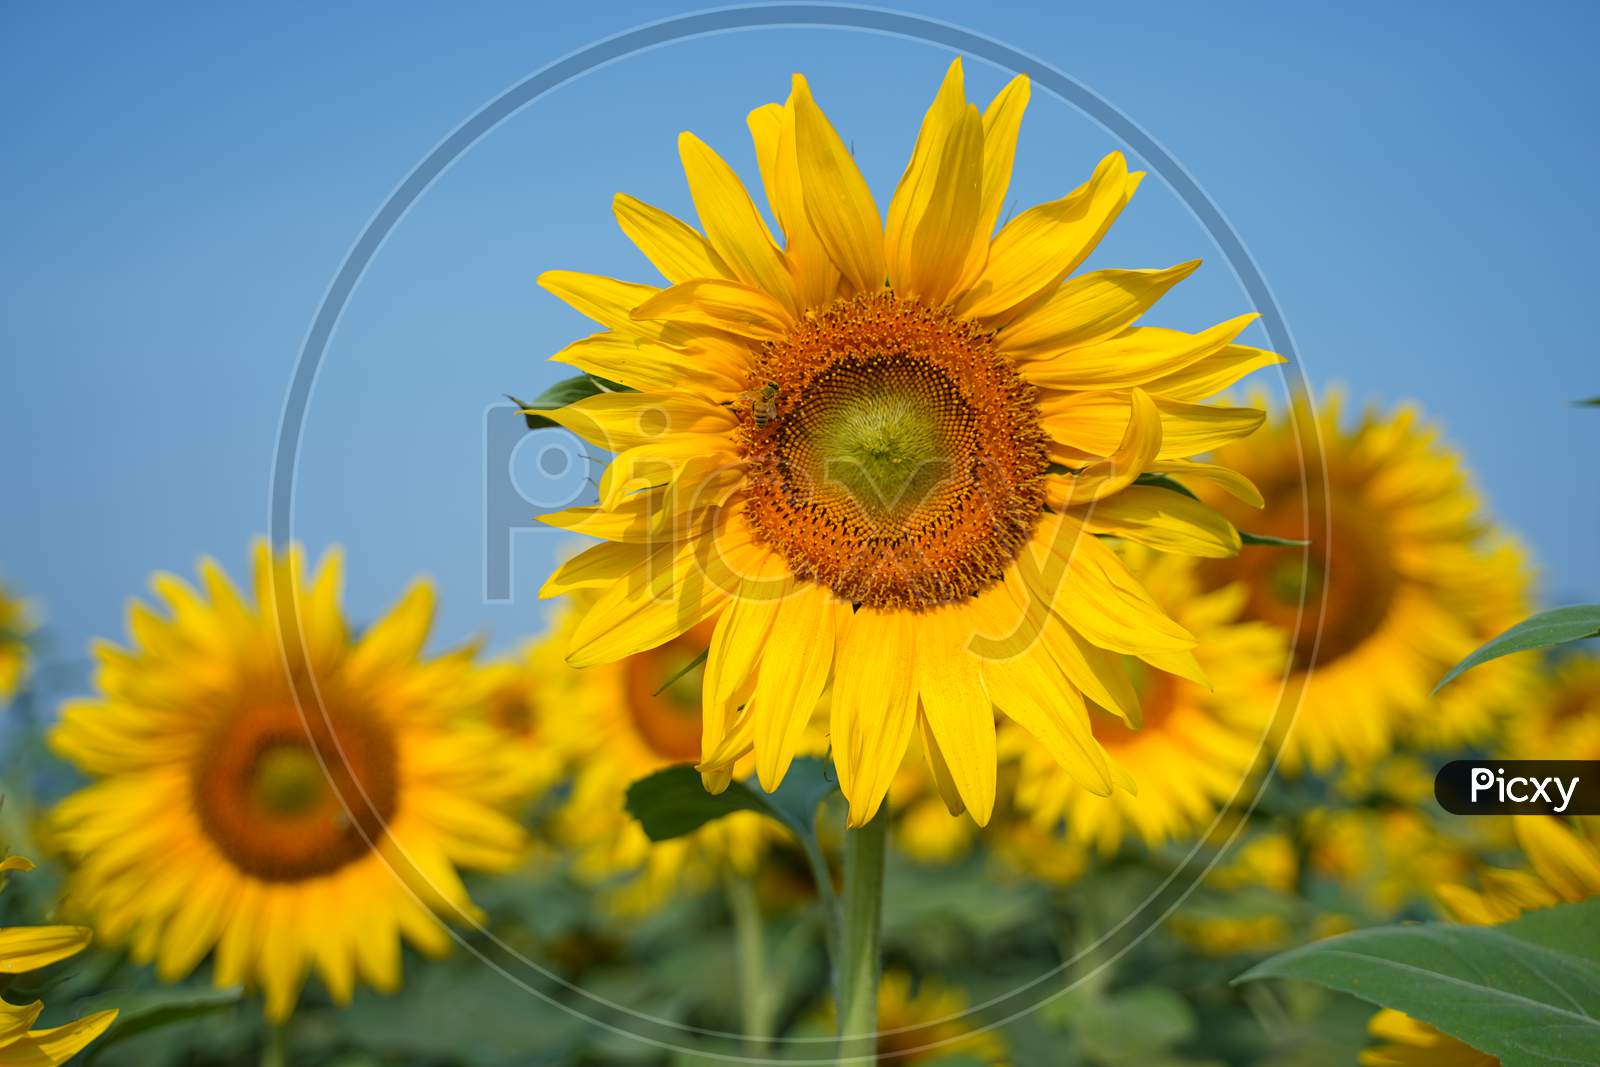 Sunflower natural background. Sunflower blooming. Close-up of sunflower